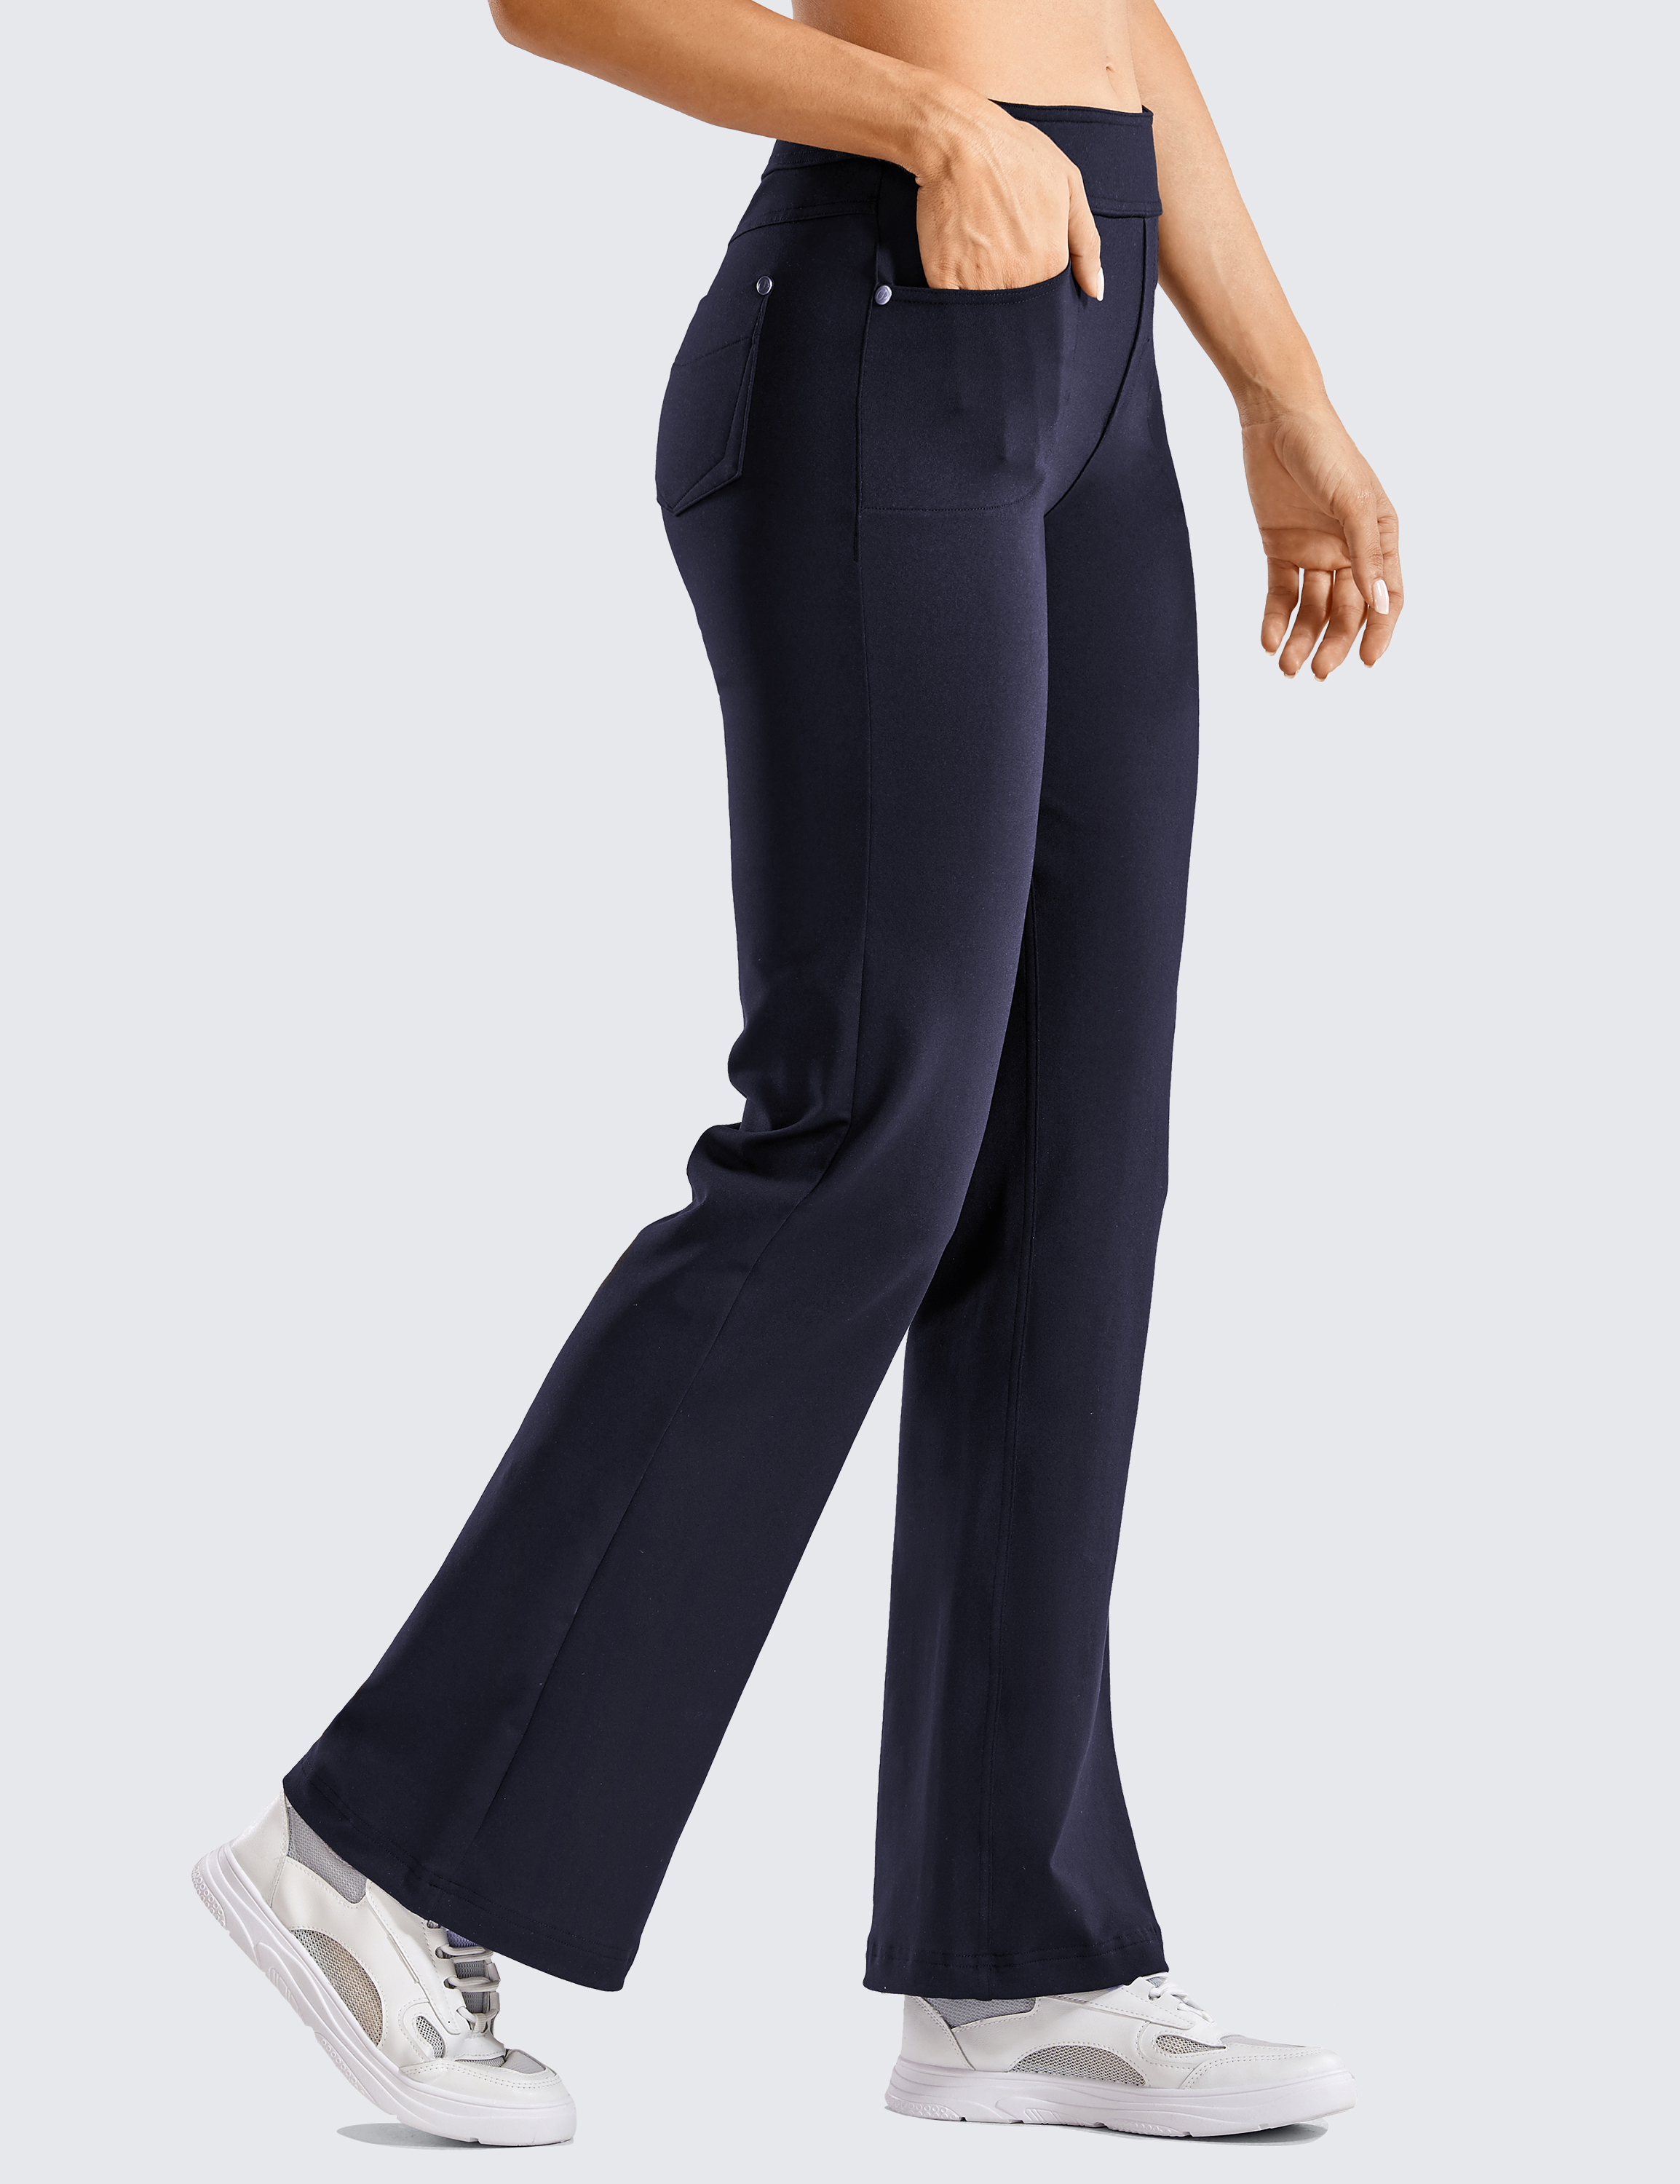 Women's Flared Pants with Pockets, Flared Leg Yoga Pants High